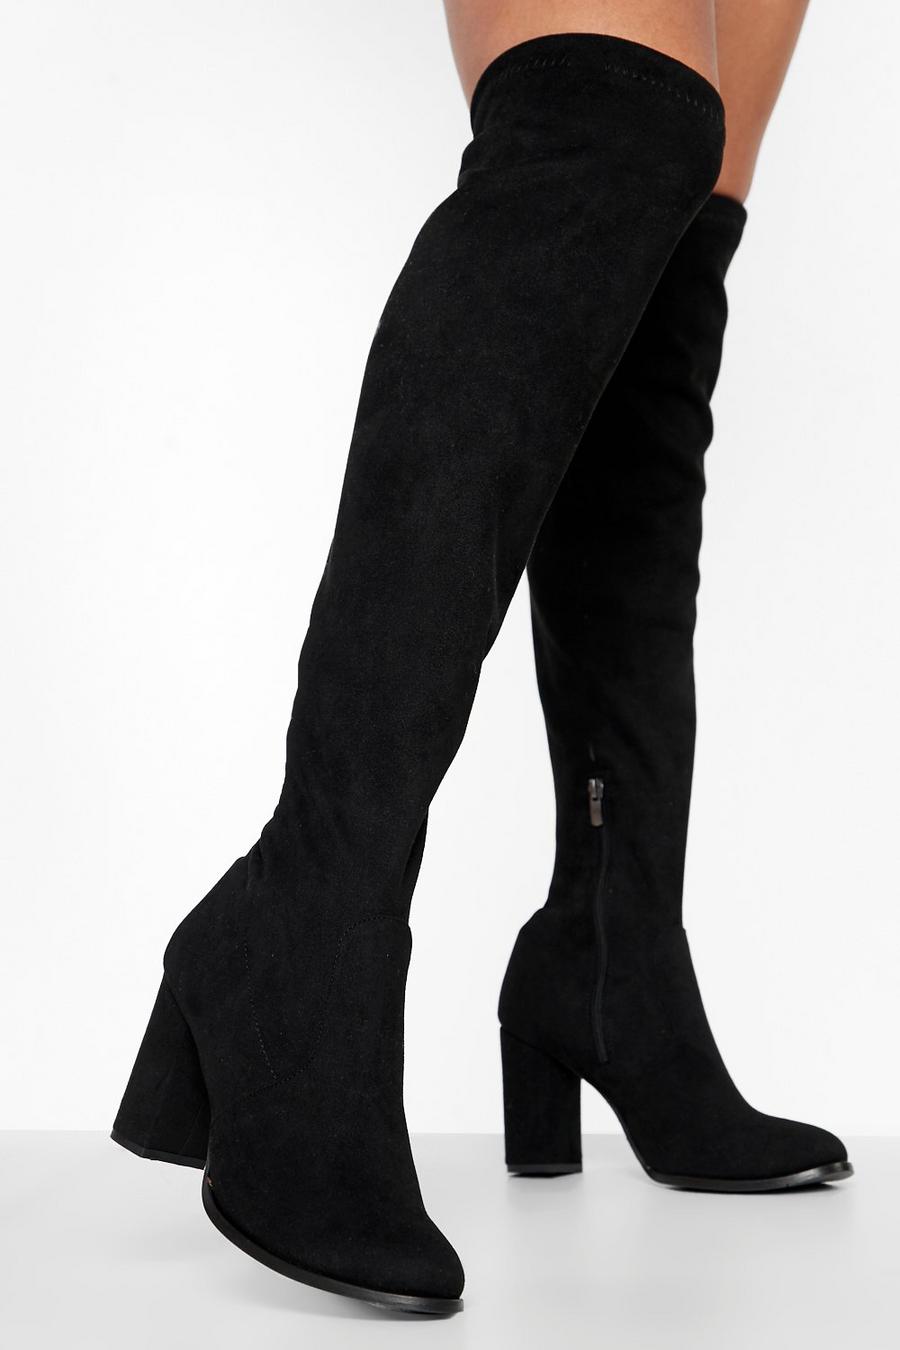 Black Block Heel Over The Knee Thigh High Boots image number 1